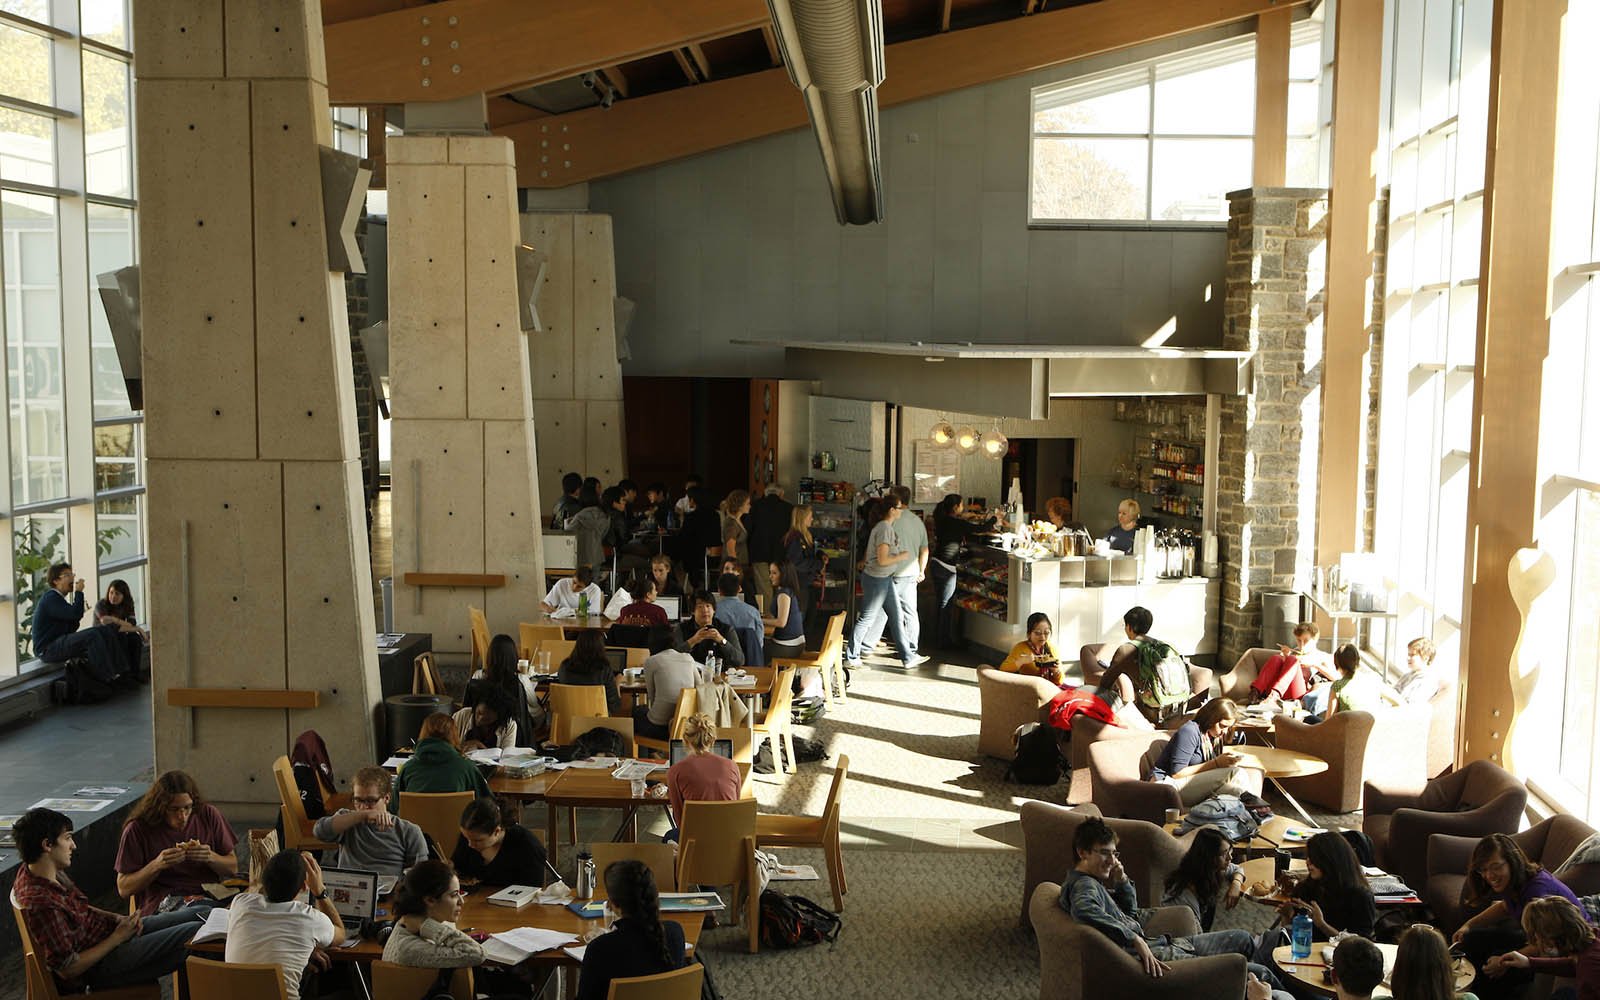 crowded campus cafe